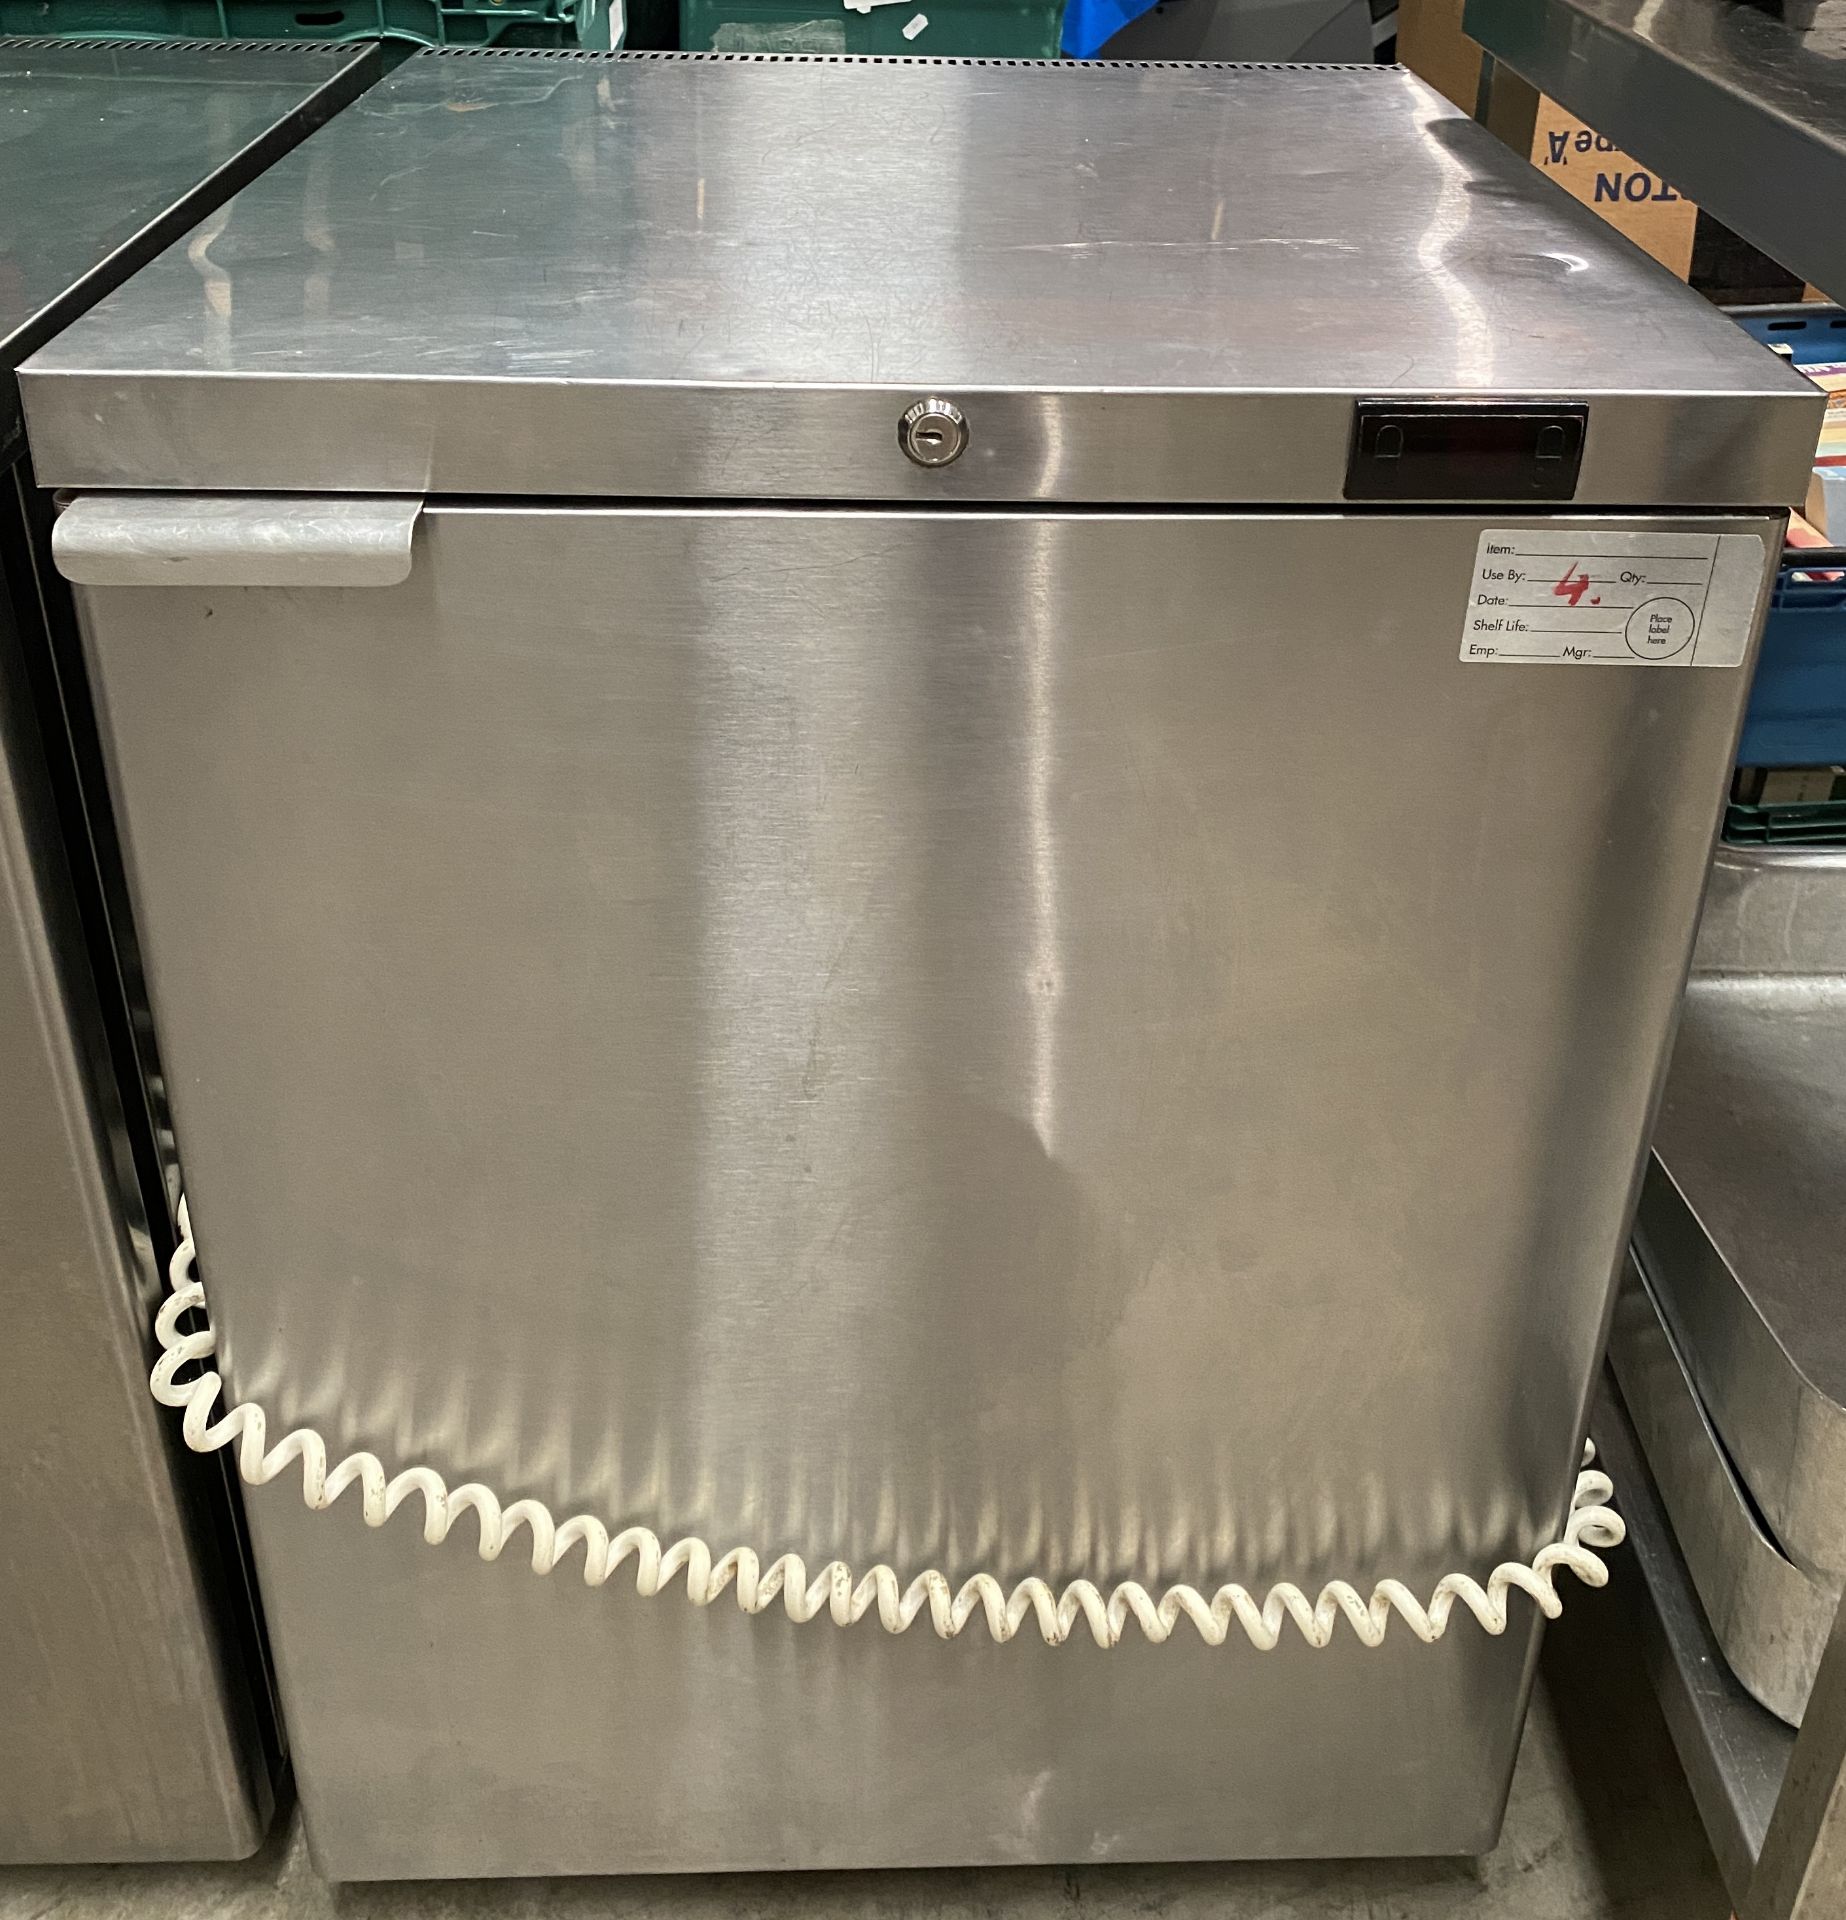 Foster Stainless Steel Undercounter Fridge with 2 Stainless Steel Shelves (failed insulation test)